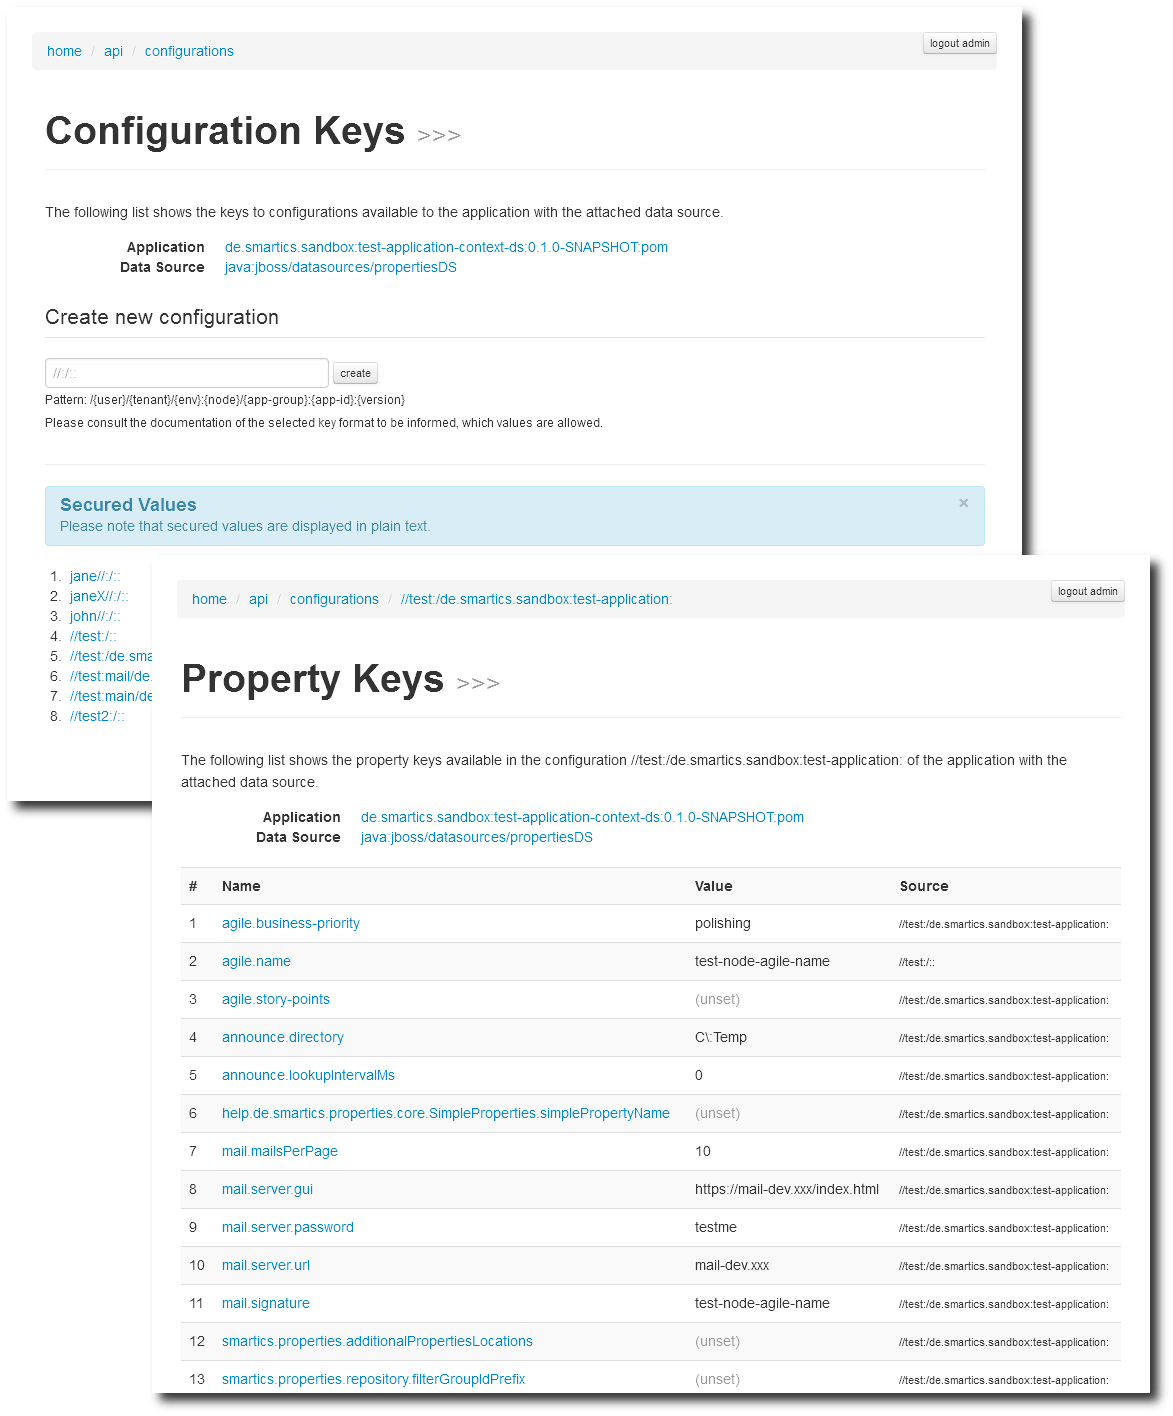 Screenshot showing the list of configuration and property keys